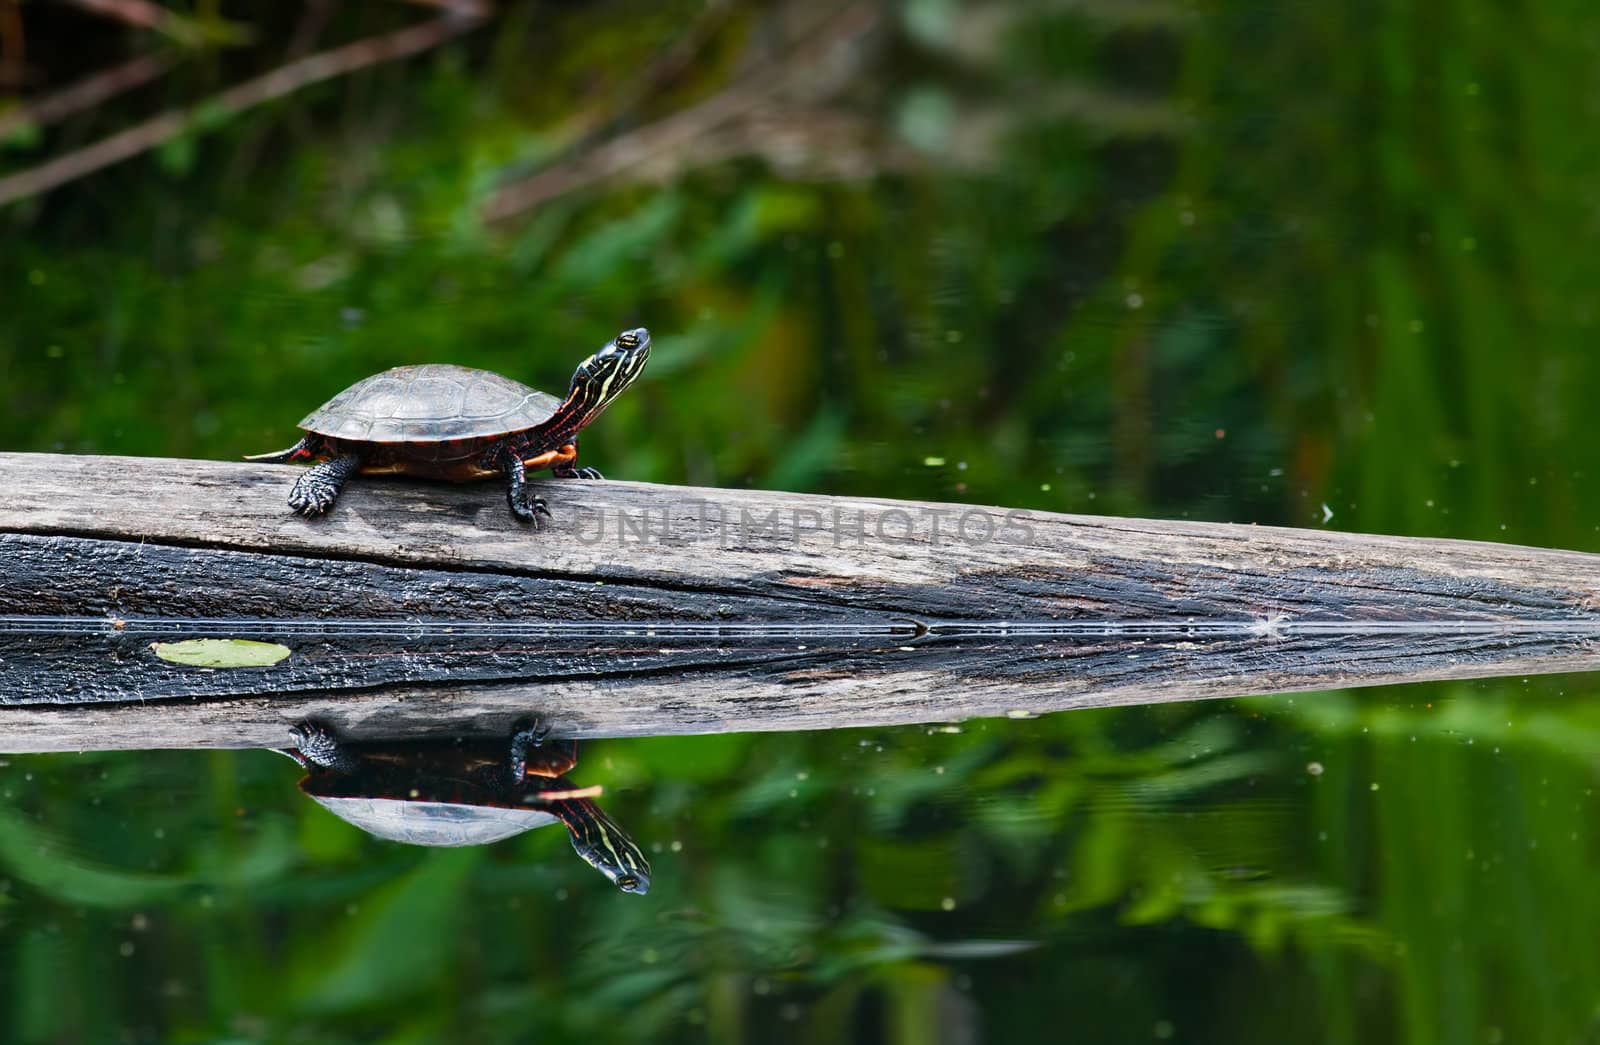 Painted Turtle by sbonk